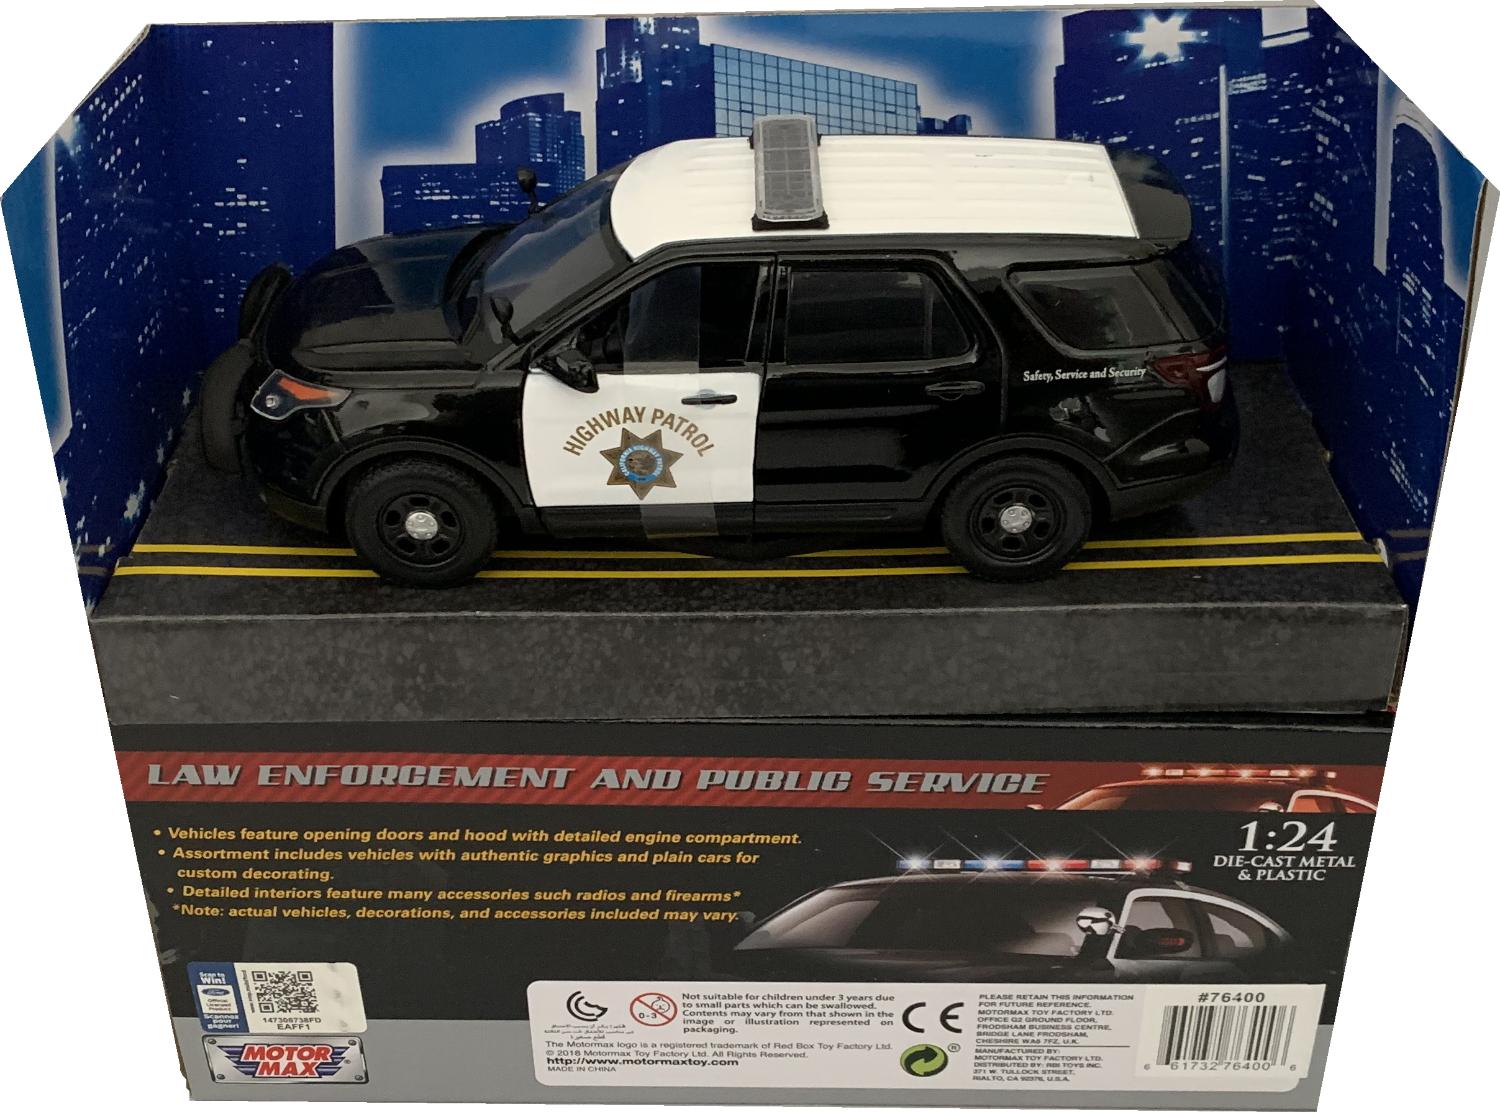 Ford Police Interceptor Utility California Highway Patrol 2015 in black / white 1:24 scale model from Motormax ,MMX76955